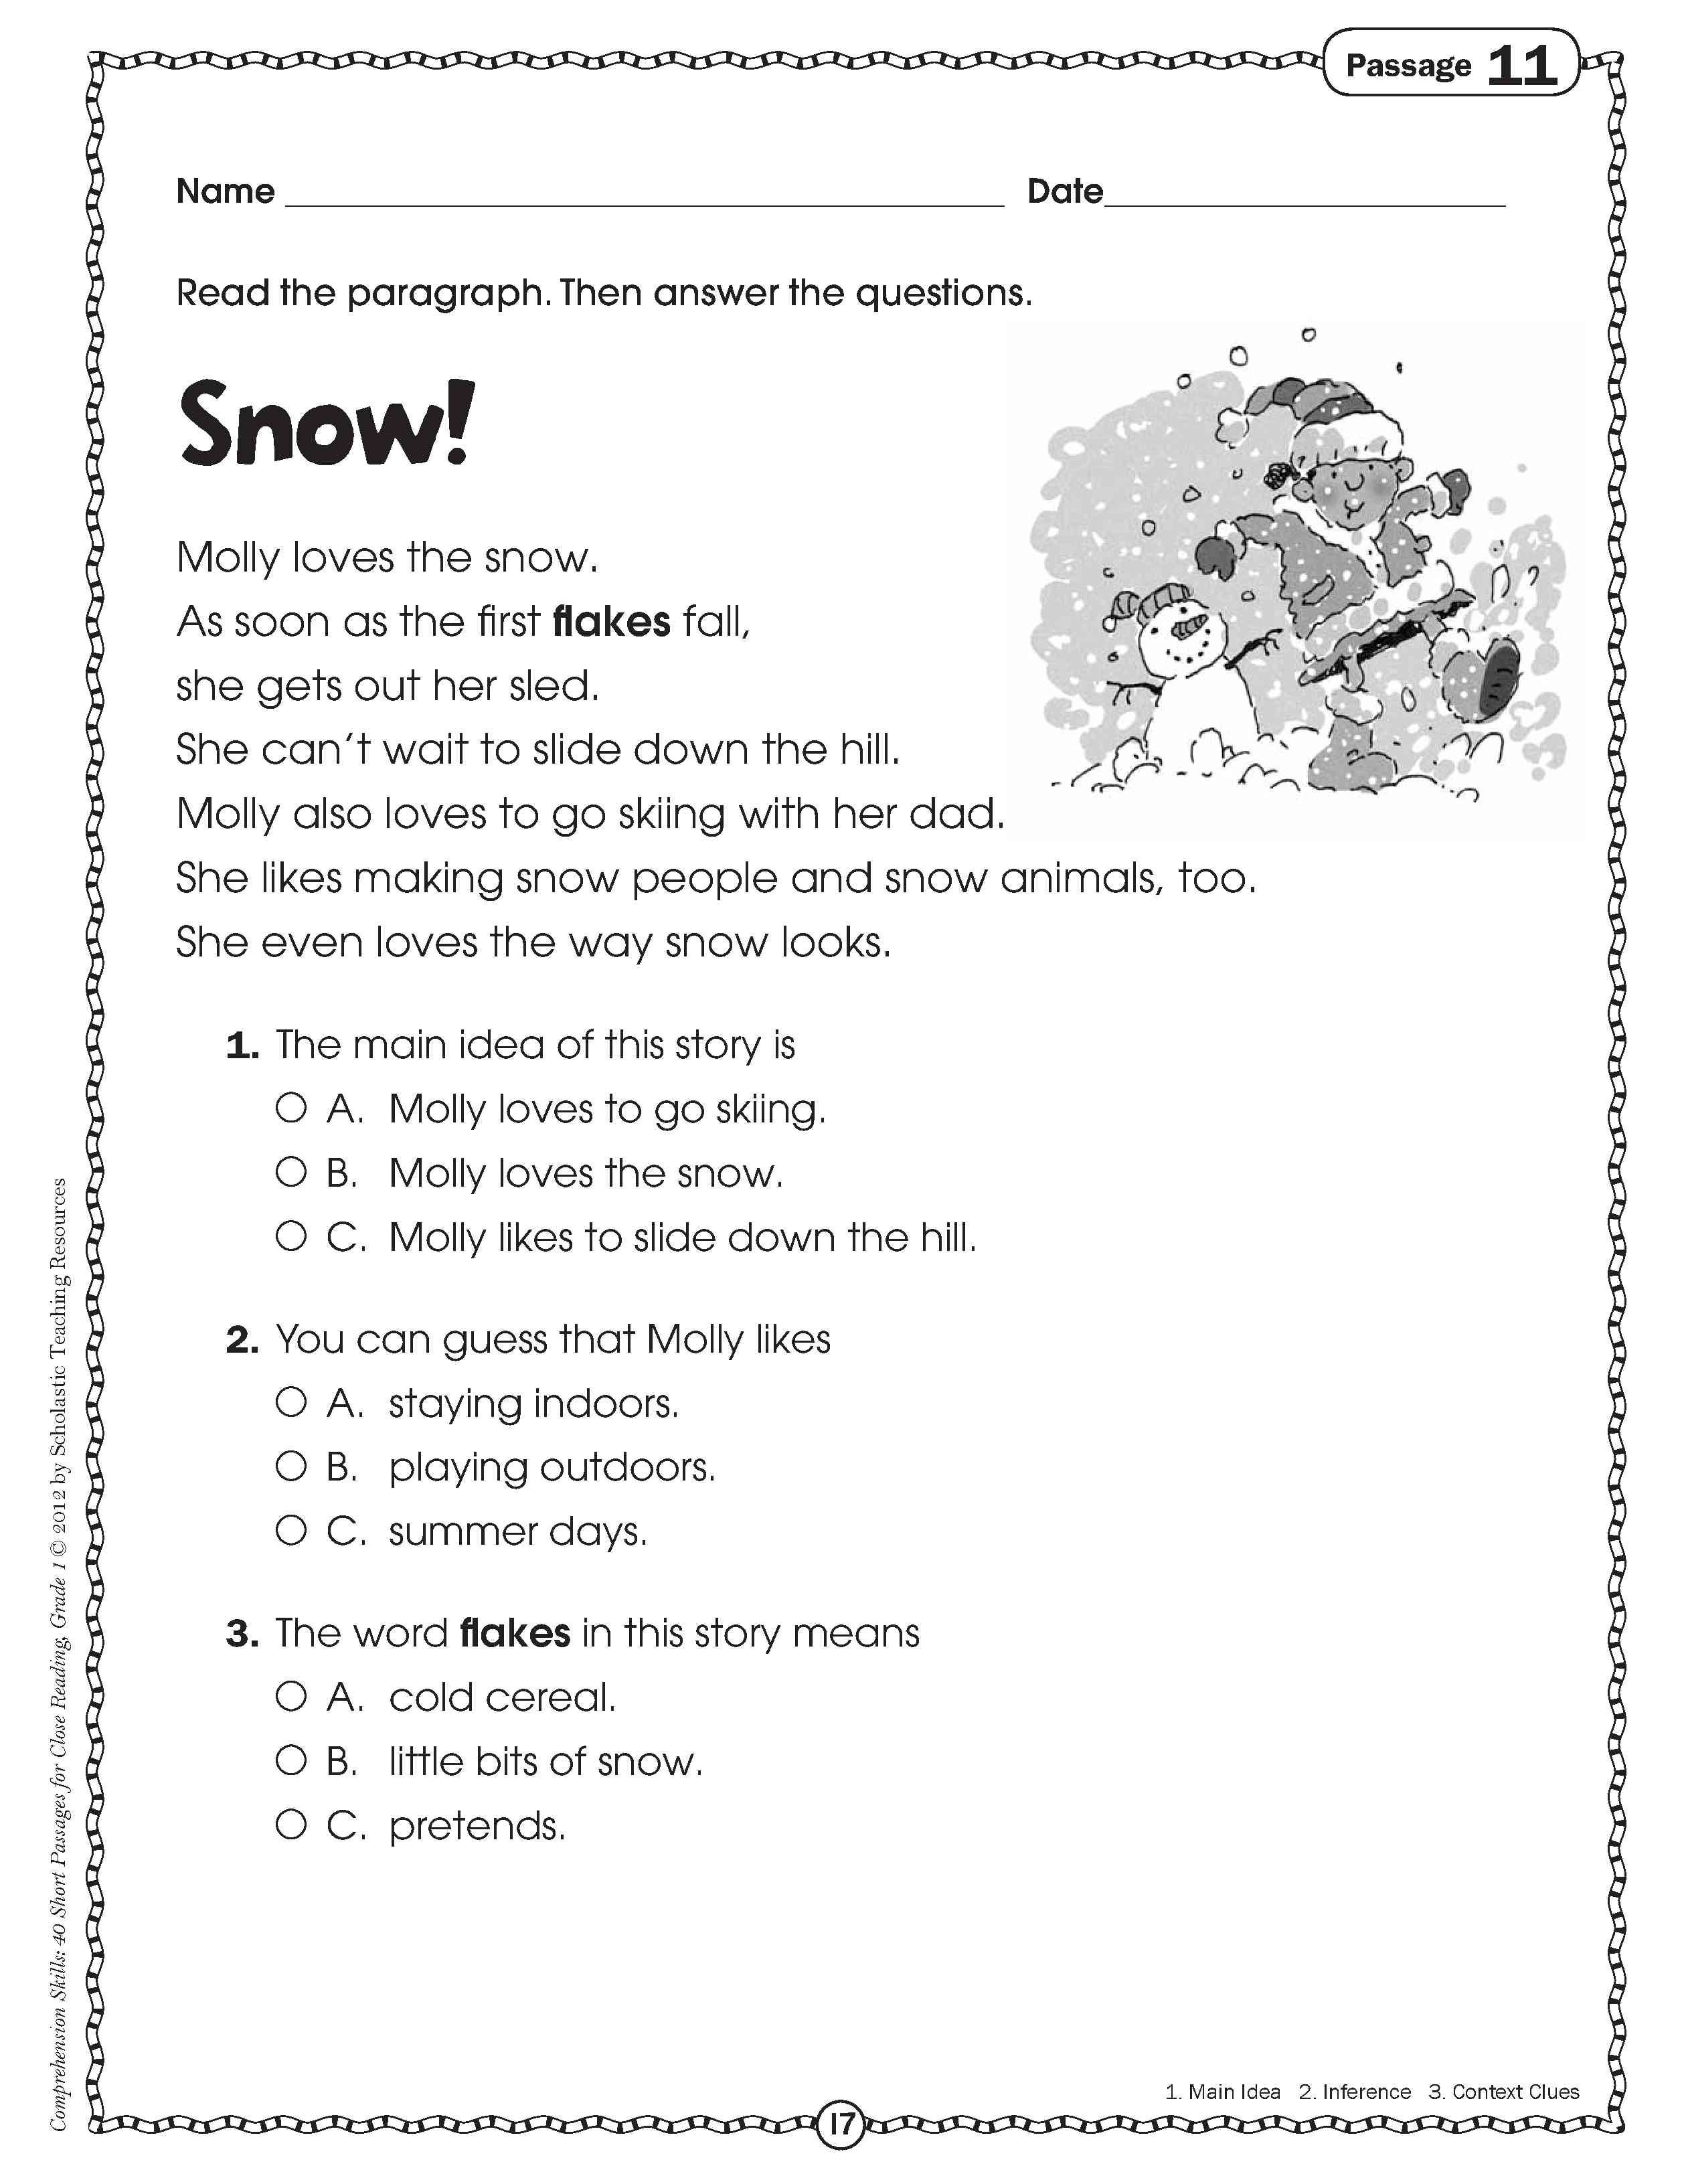 17 Best Images of Close Reading Worksheets - Free ...